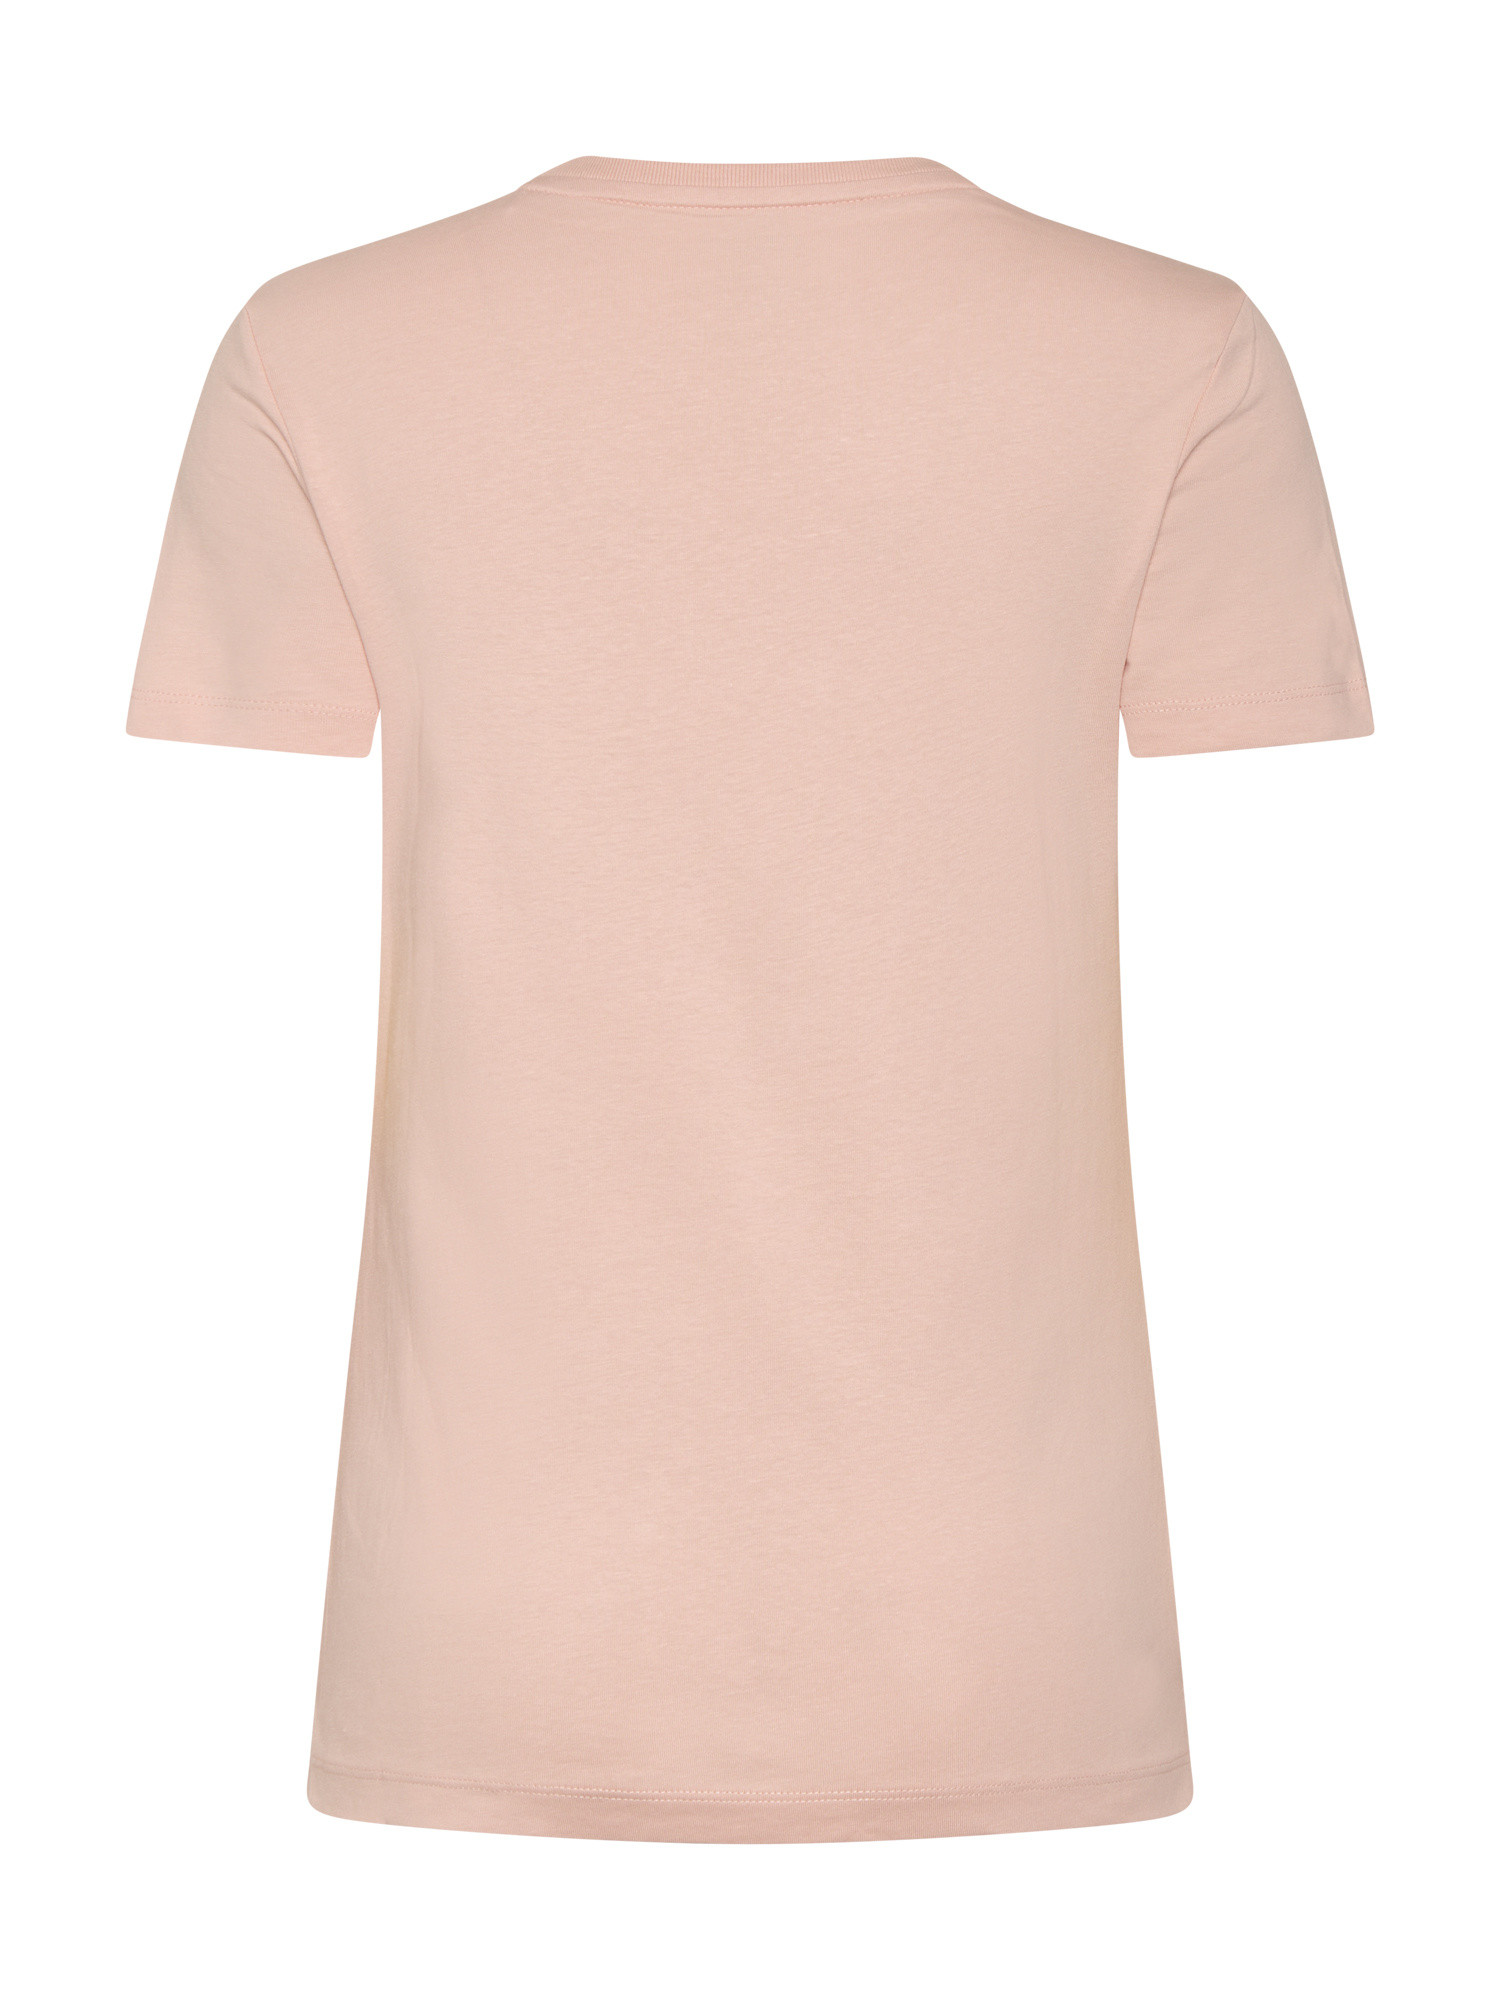 Guess - T-shirt con logo triangolo icon, Rosa, large image number 1